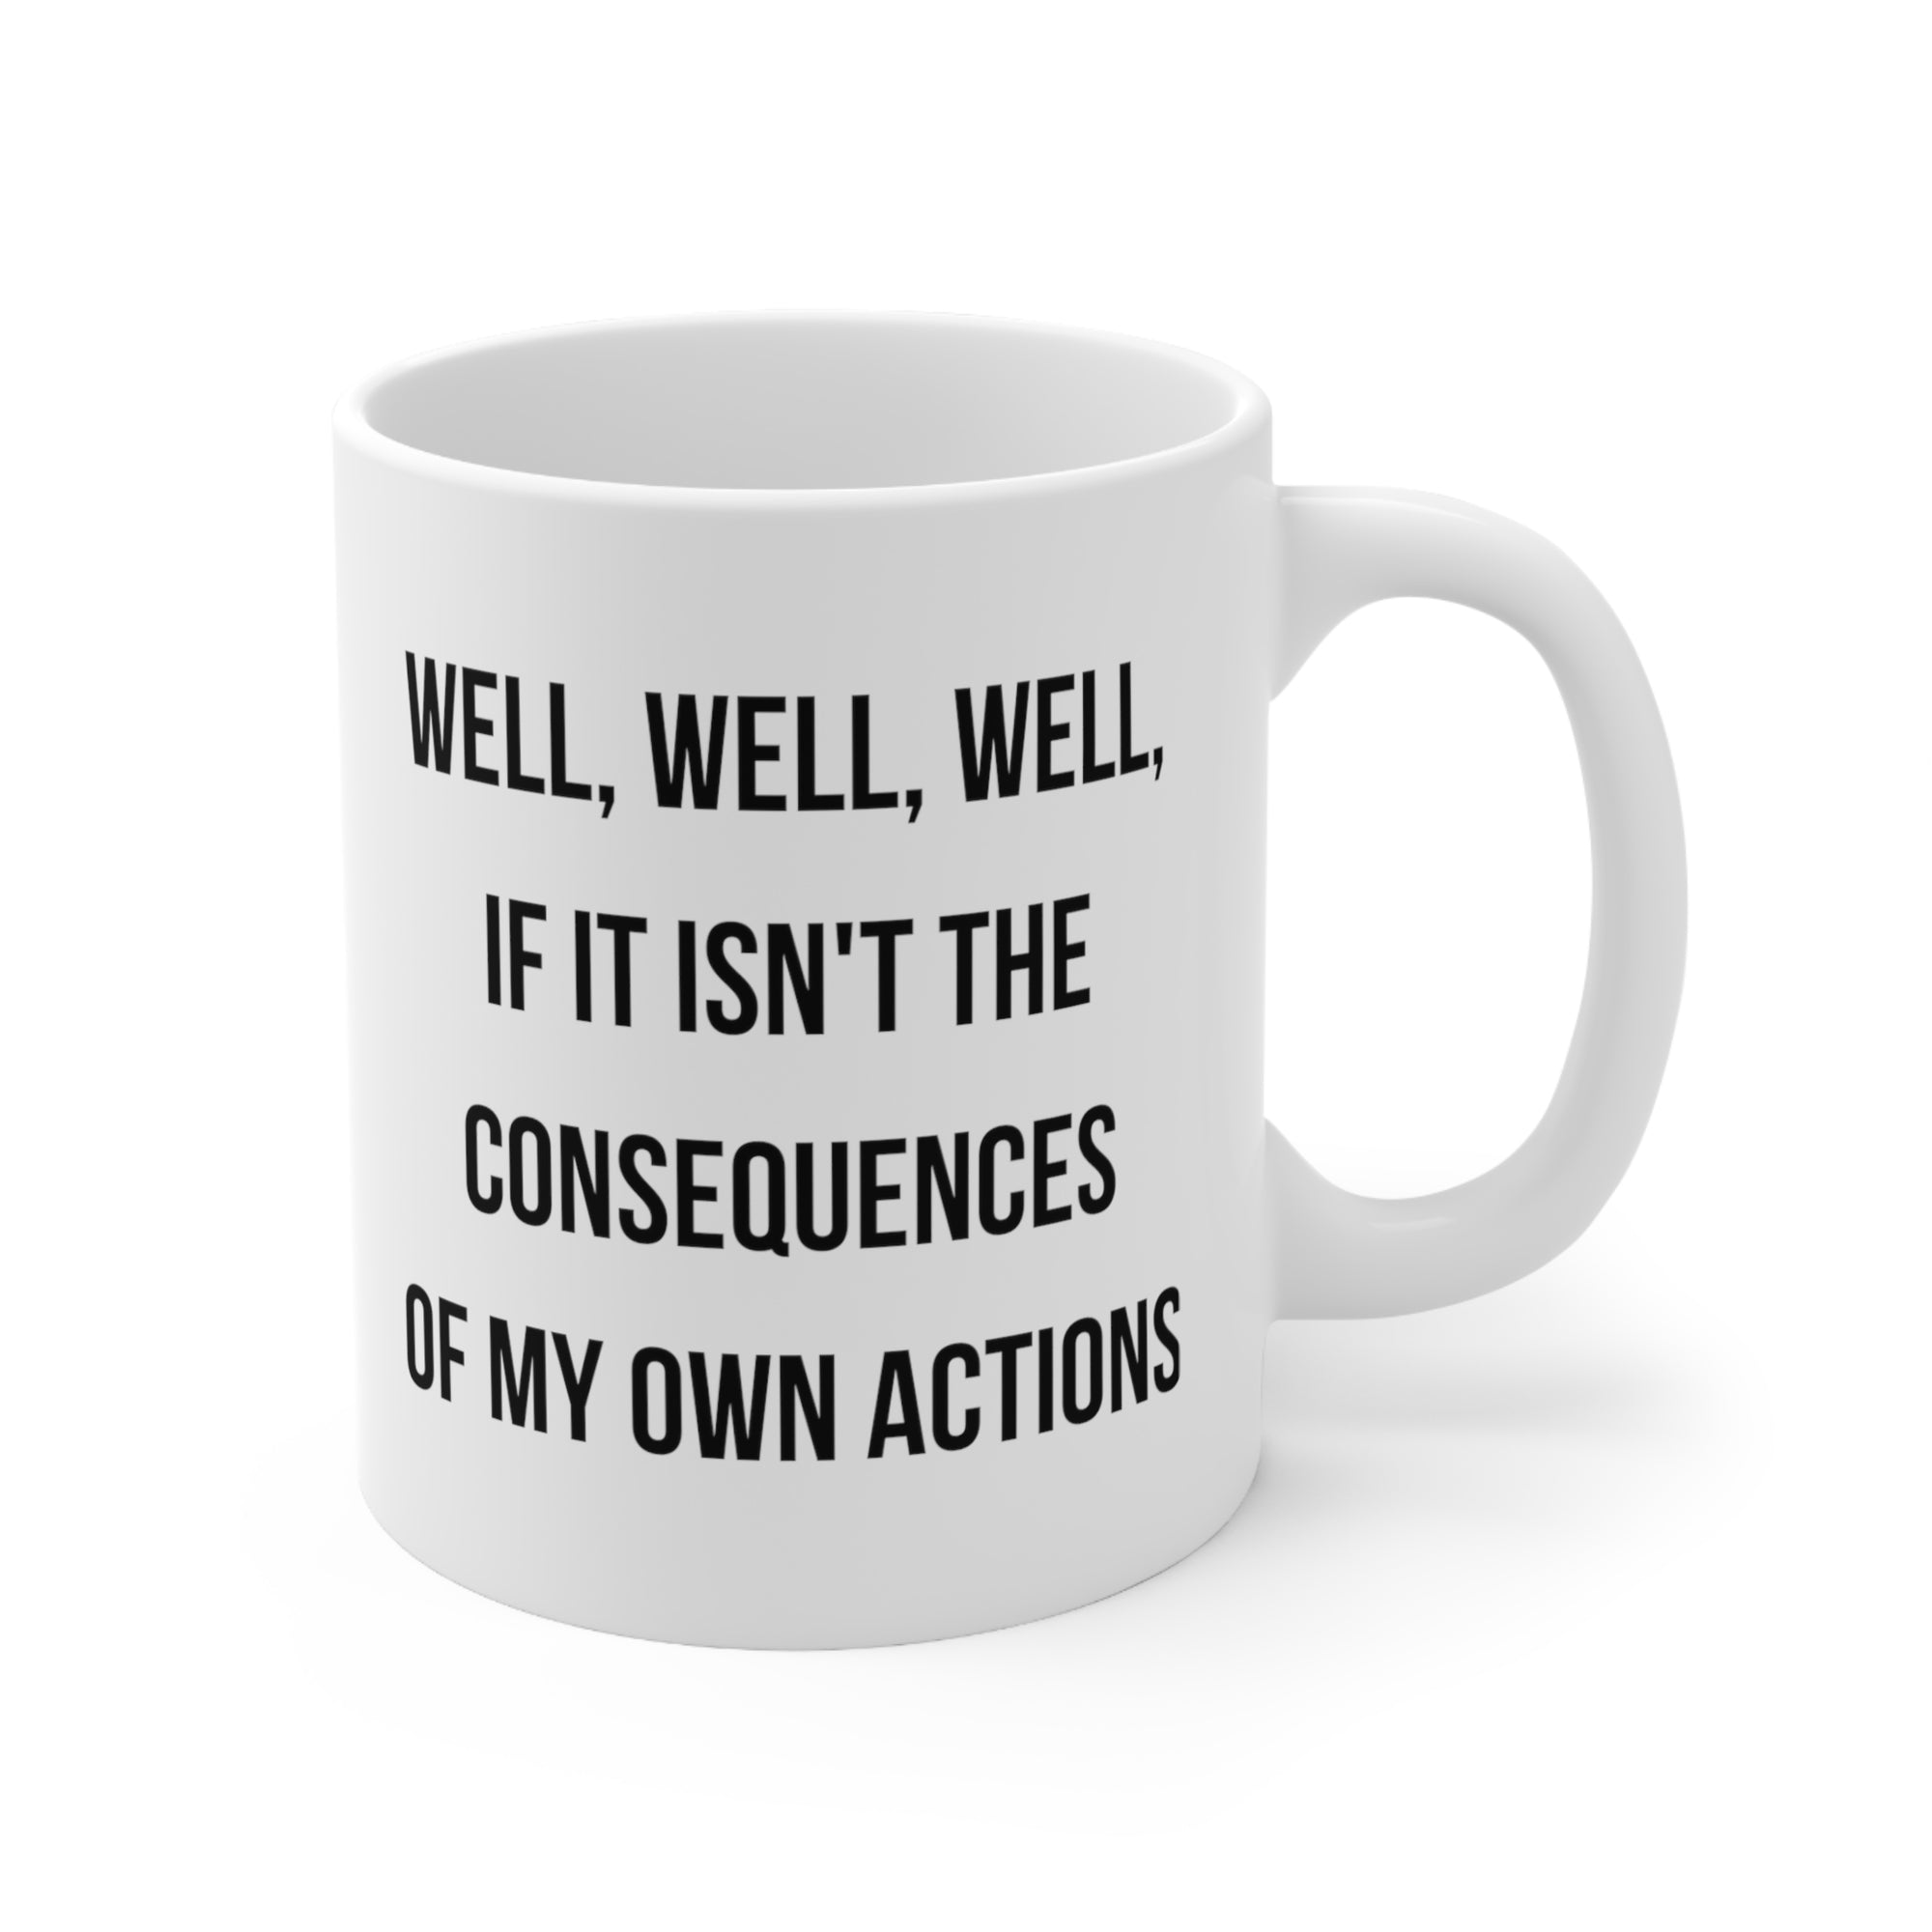 Well Well Well If It Isnt The Consequences of My Own Actions Mug